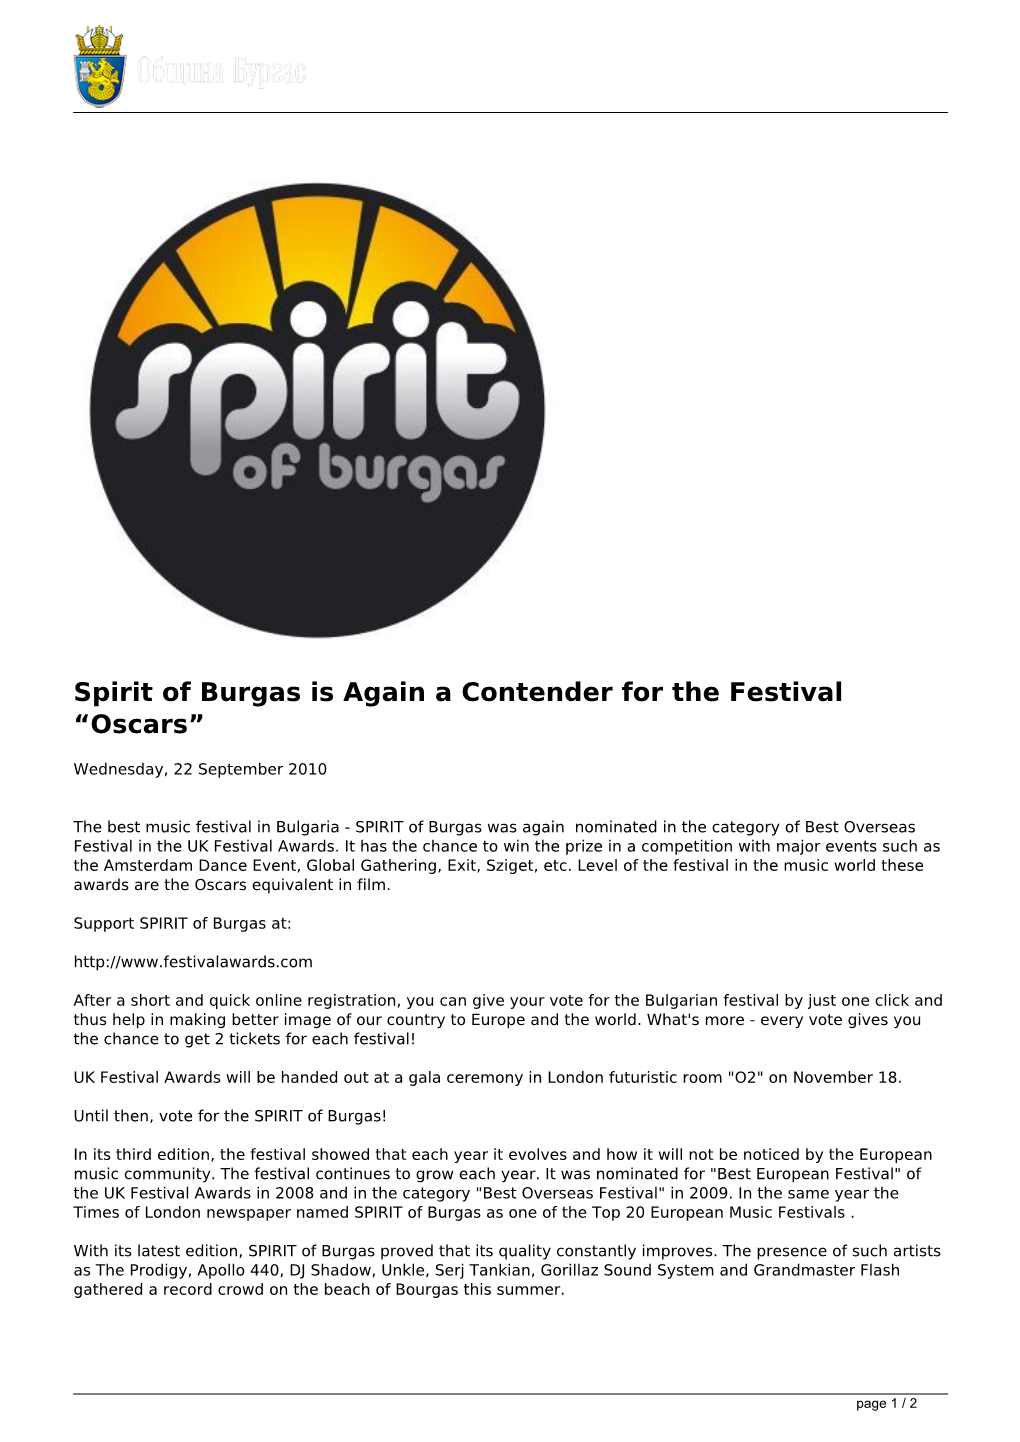 Spirit of Burgas Is Again a Contender for the Festival “Oscars”